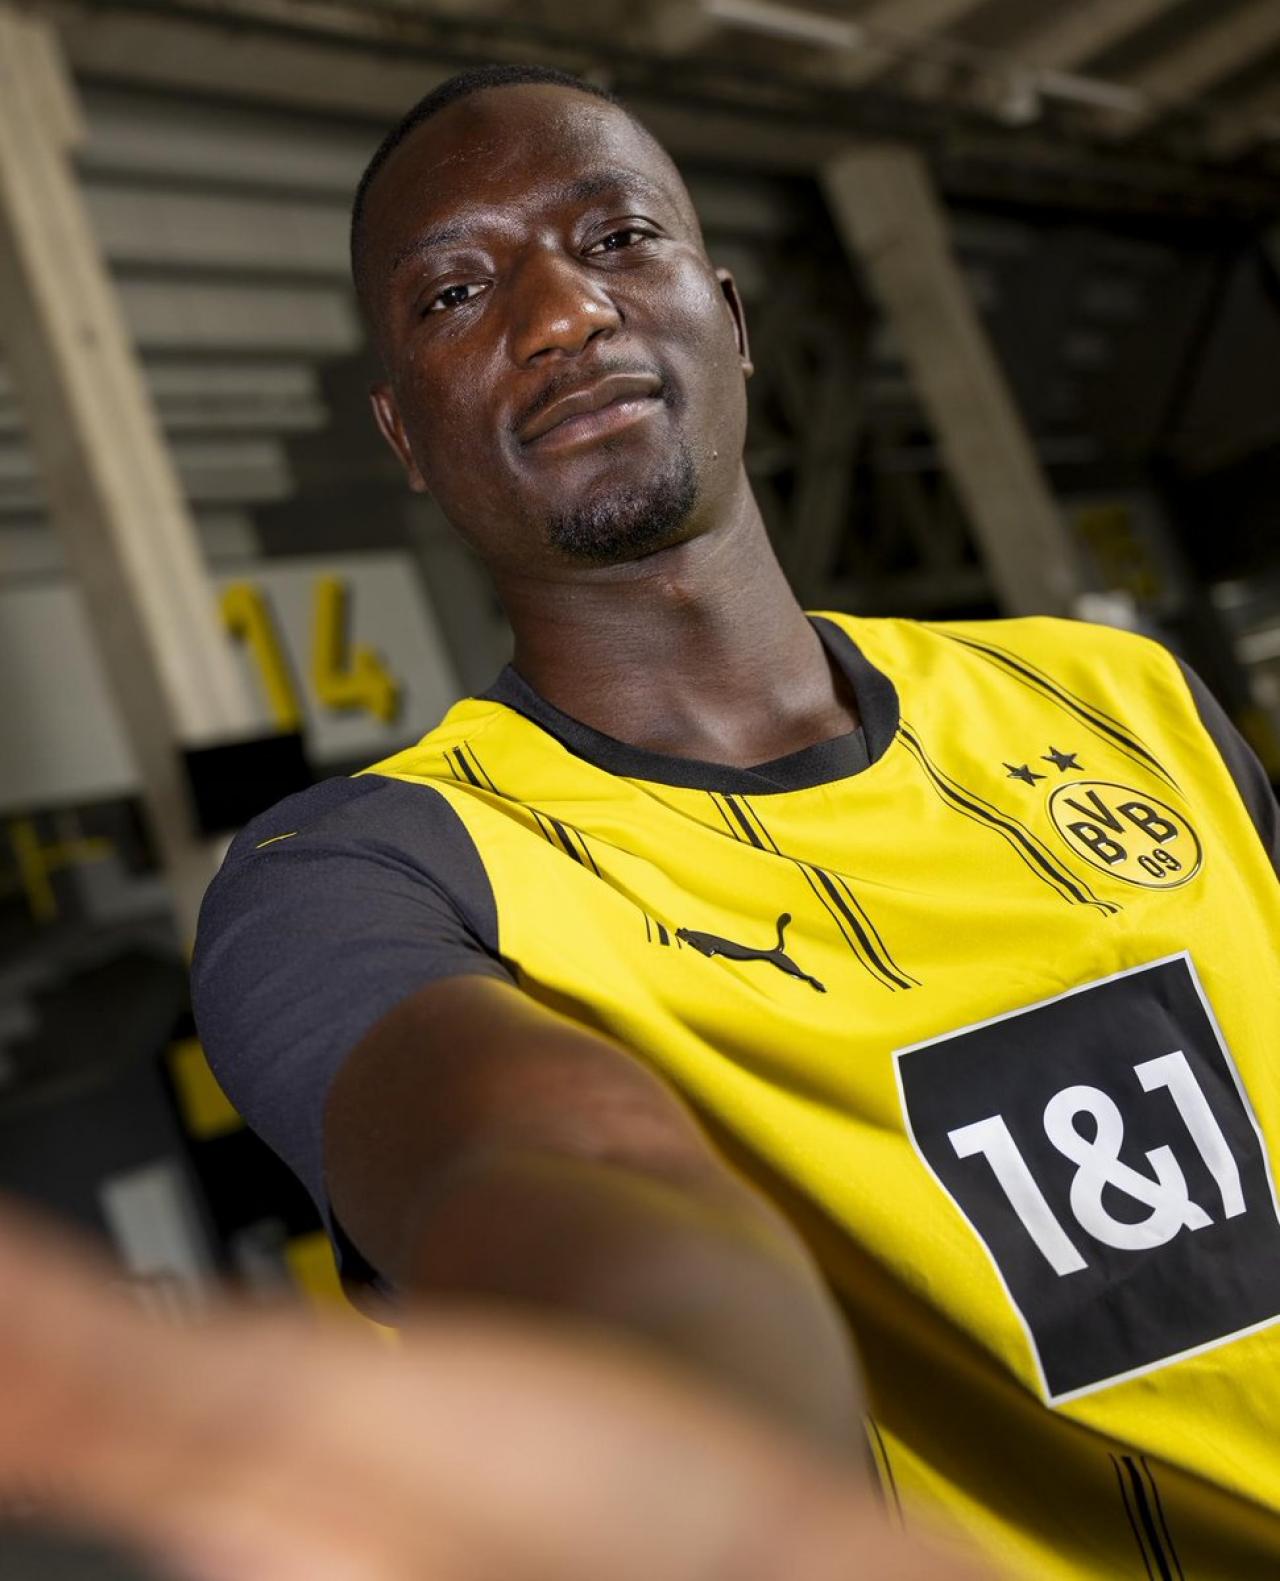 Dortmund complete Guirassy signing: “I've come here to win titles.”